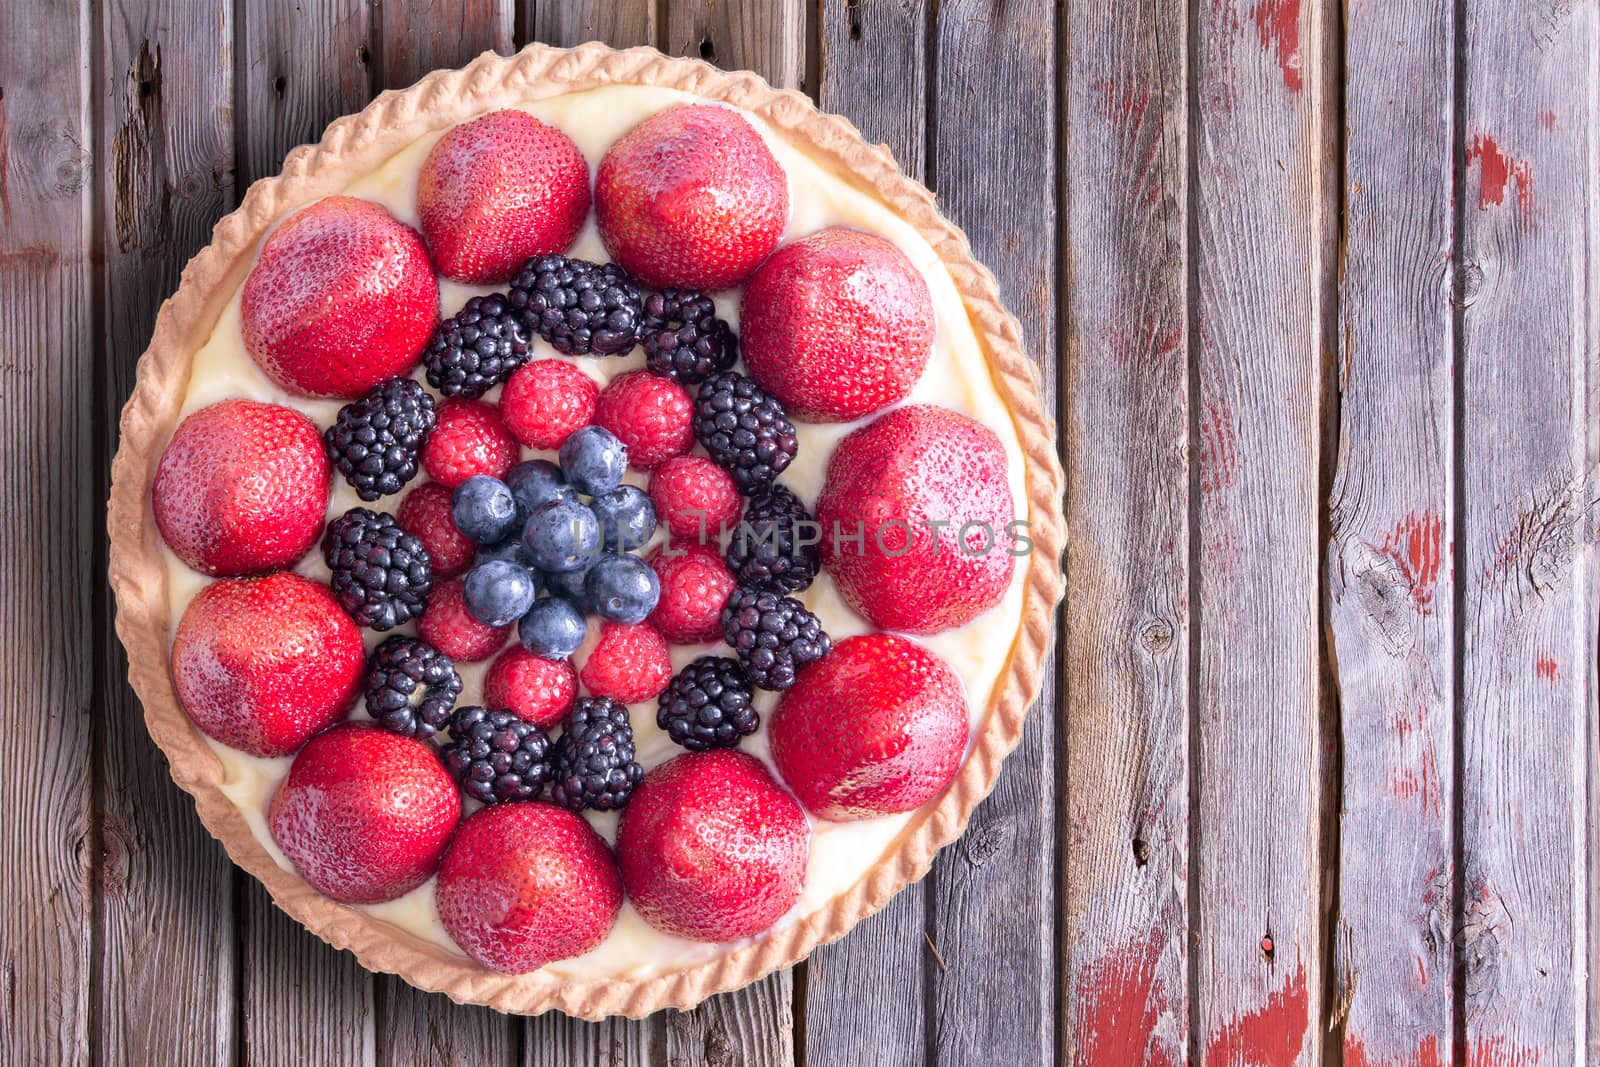 Close up Tasty Homemade Tart with Fresh Berry Fruits on Top of a Rustic Table, Captured in High Angle View.